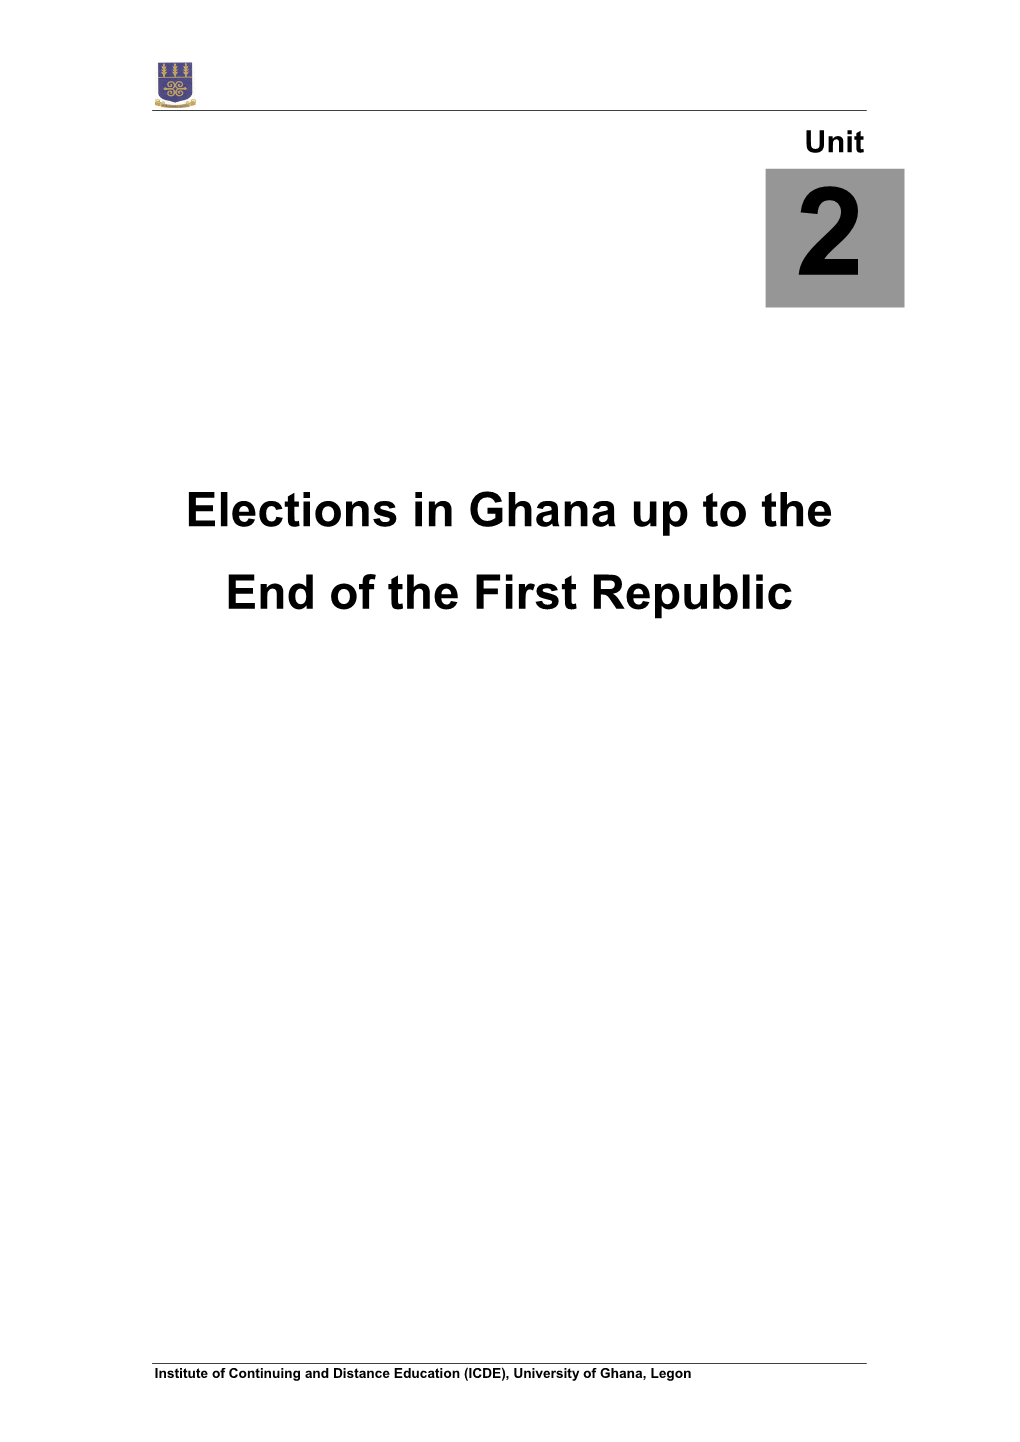 Elections in Ghana up to the End of the First Republic